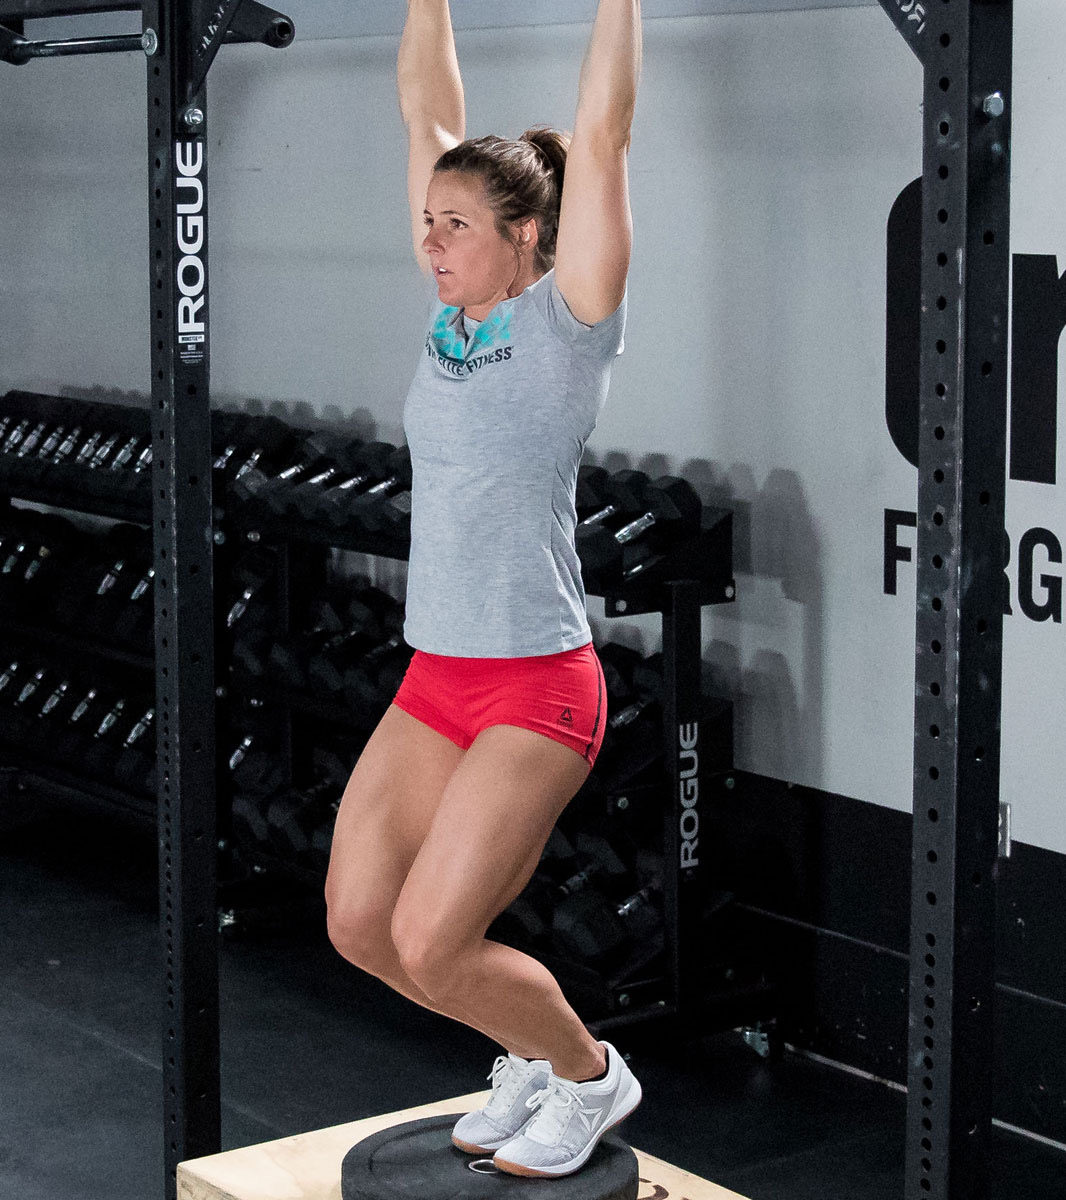 CrossFit Open scaled pullups